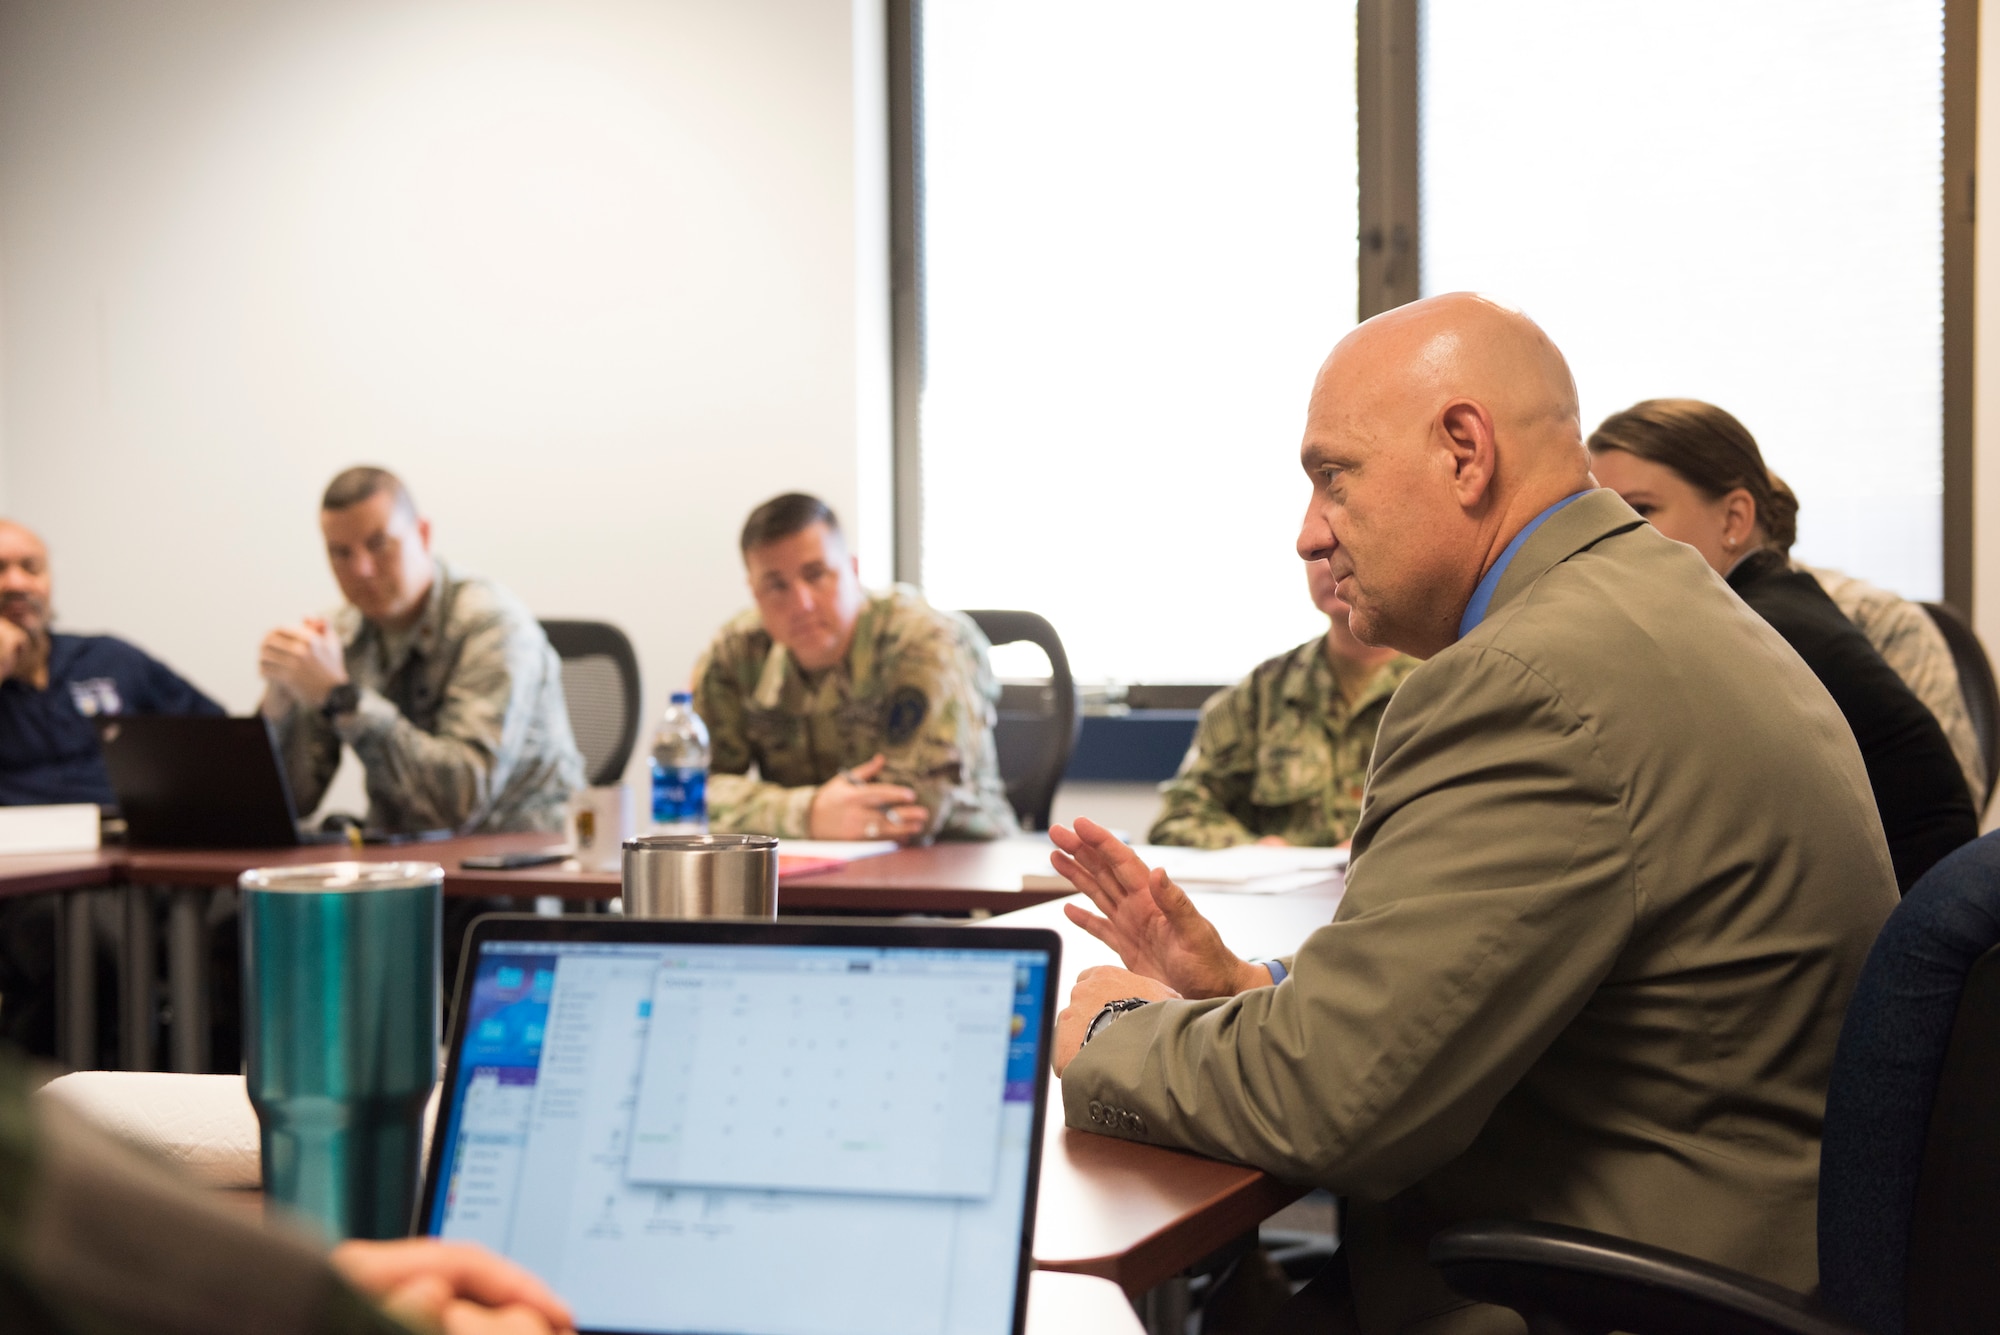 Dr. Melvin Deaile teaches a class of students enrolled in The School of Advanced Nuclear Deterrence Studies at Air Command and Staff College, September 19, 2018. Students are immersed in deterrence theory as well as the technical and strategic aspect of nuclear operations. Deaile, a 2017 Air Education and Training Command educator of the year, is the director of SANDS, which recently moved from Kirtland Air Force Base, New Mexico, to Air University.  (U.S. Air Force photo by Airman First Class Charles Welty)